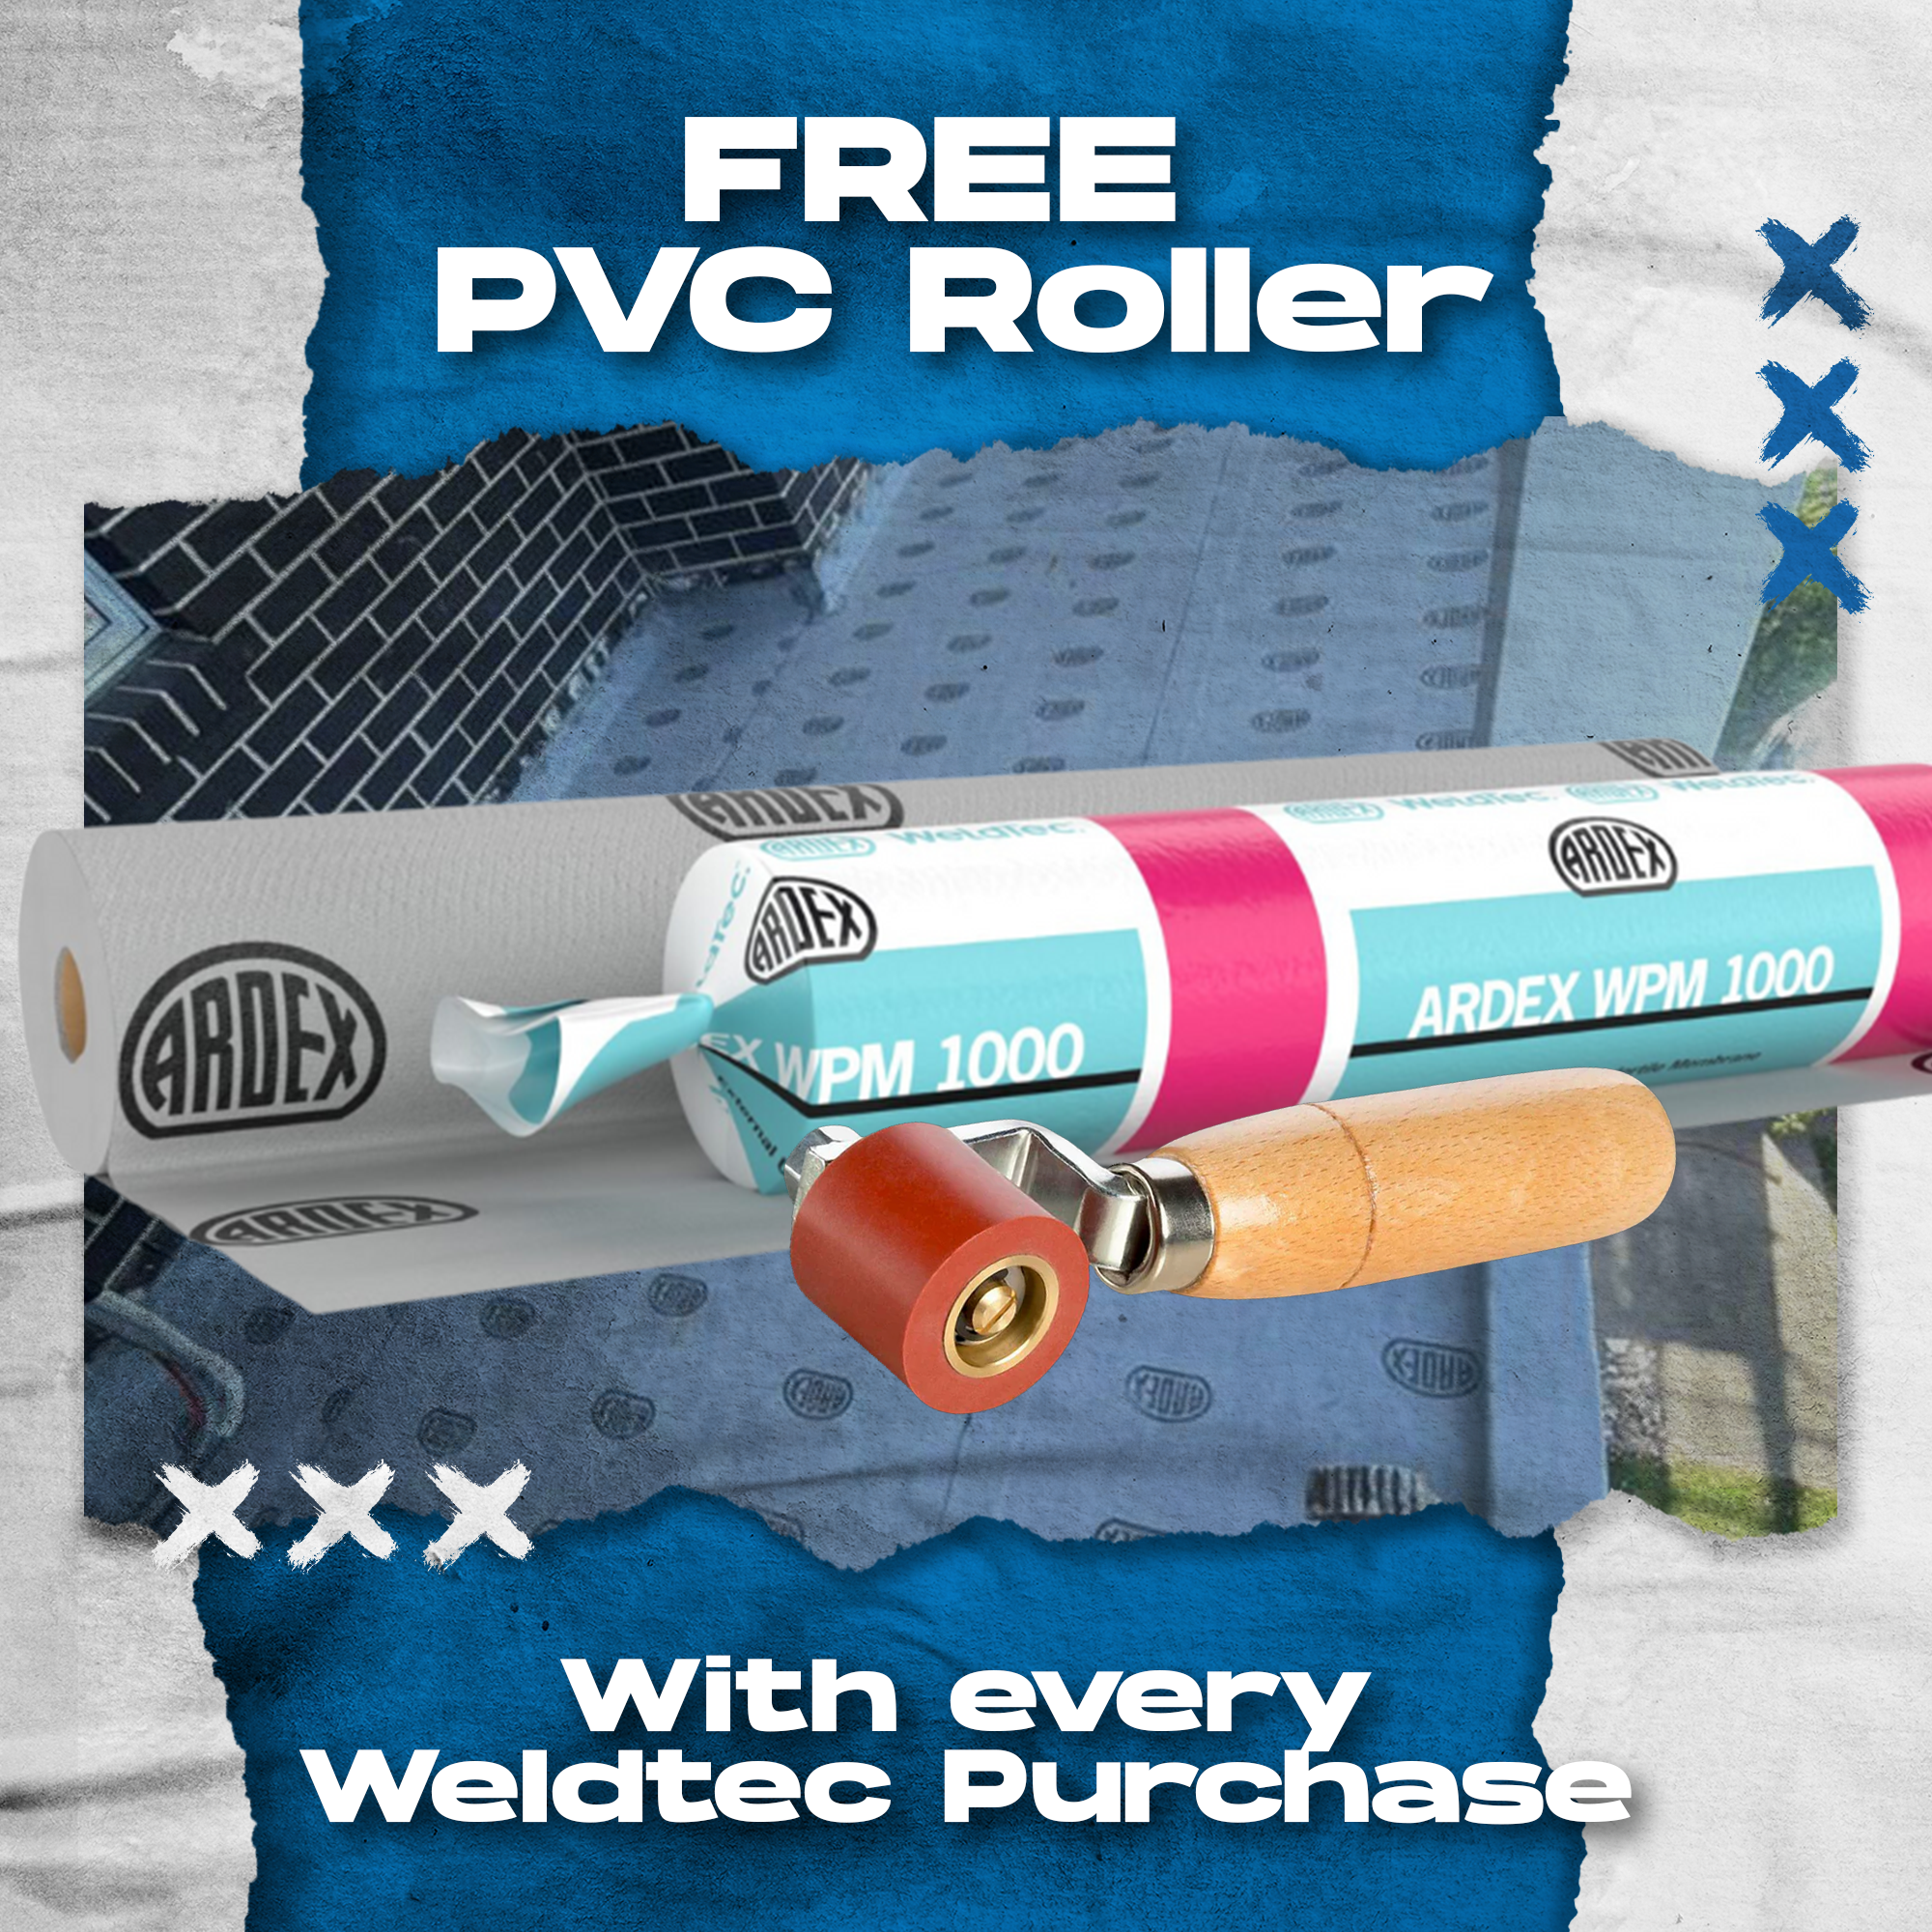 Free PVC Roller With Every Weldtec Purchase